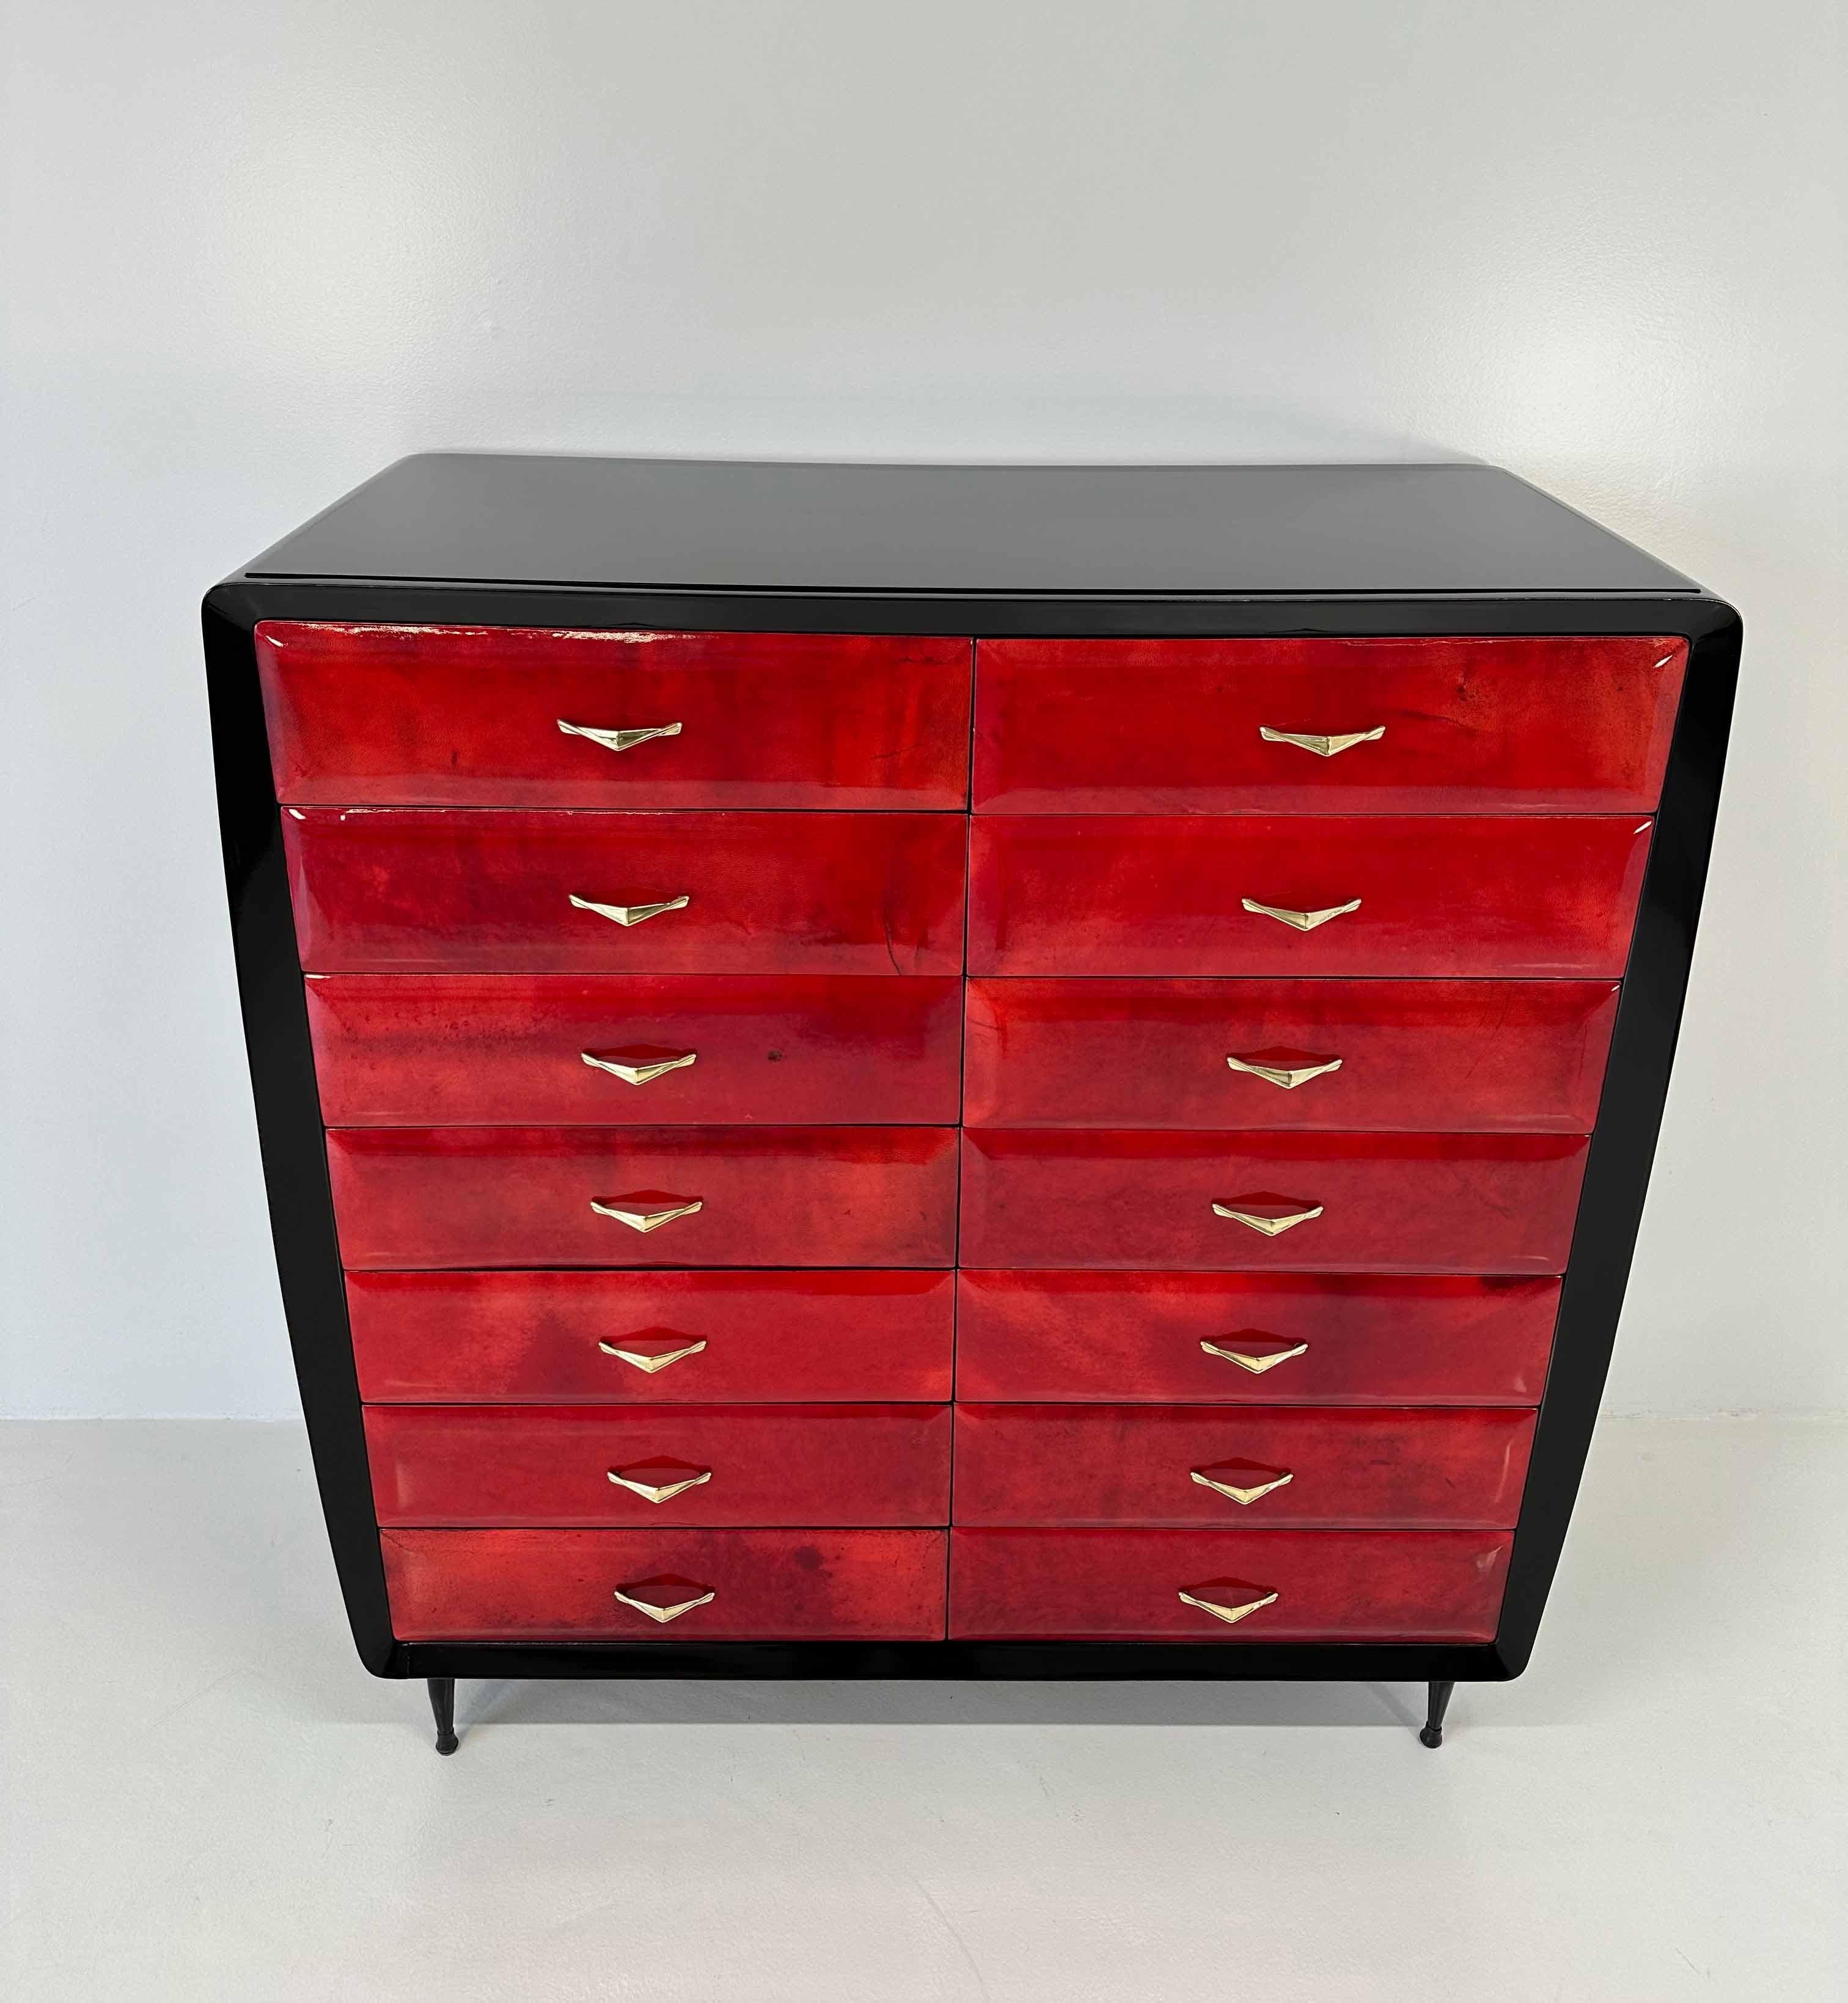 Mid-20th Century Italian Art Deco Cherry Red Parchment Chest of 14 Drawers, 1950s For Sale